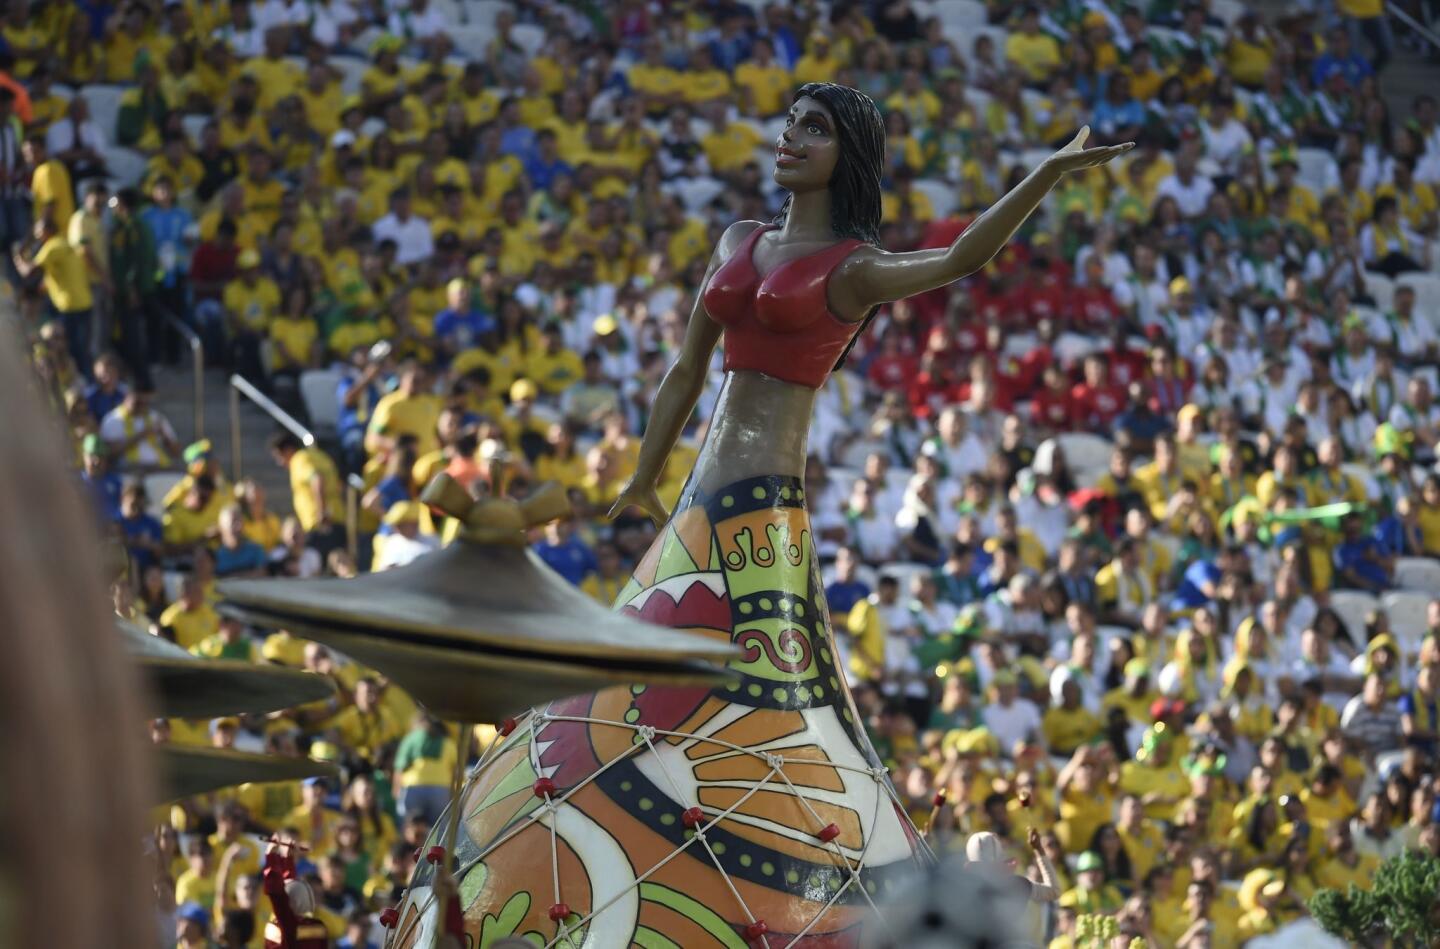 2014 FIFA World Cup opening ceremony